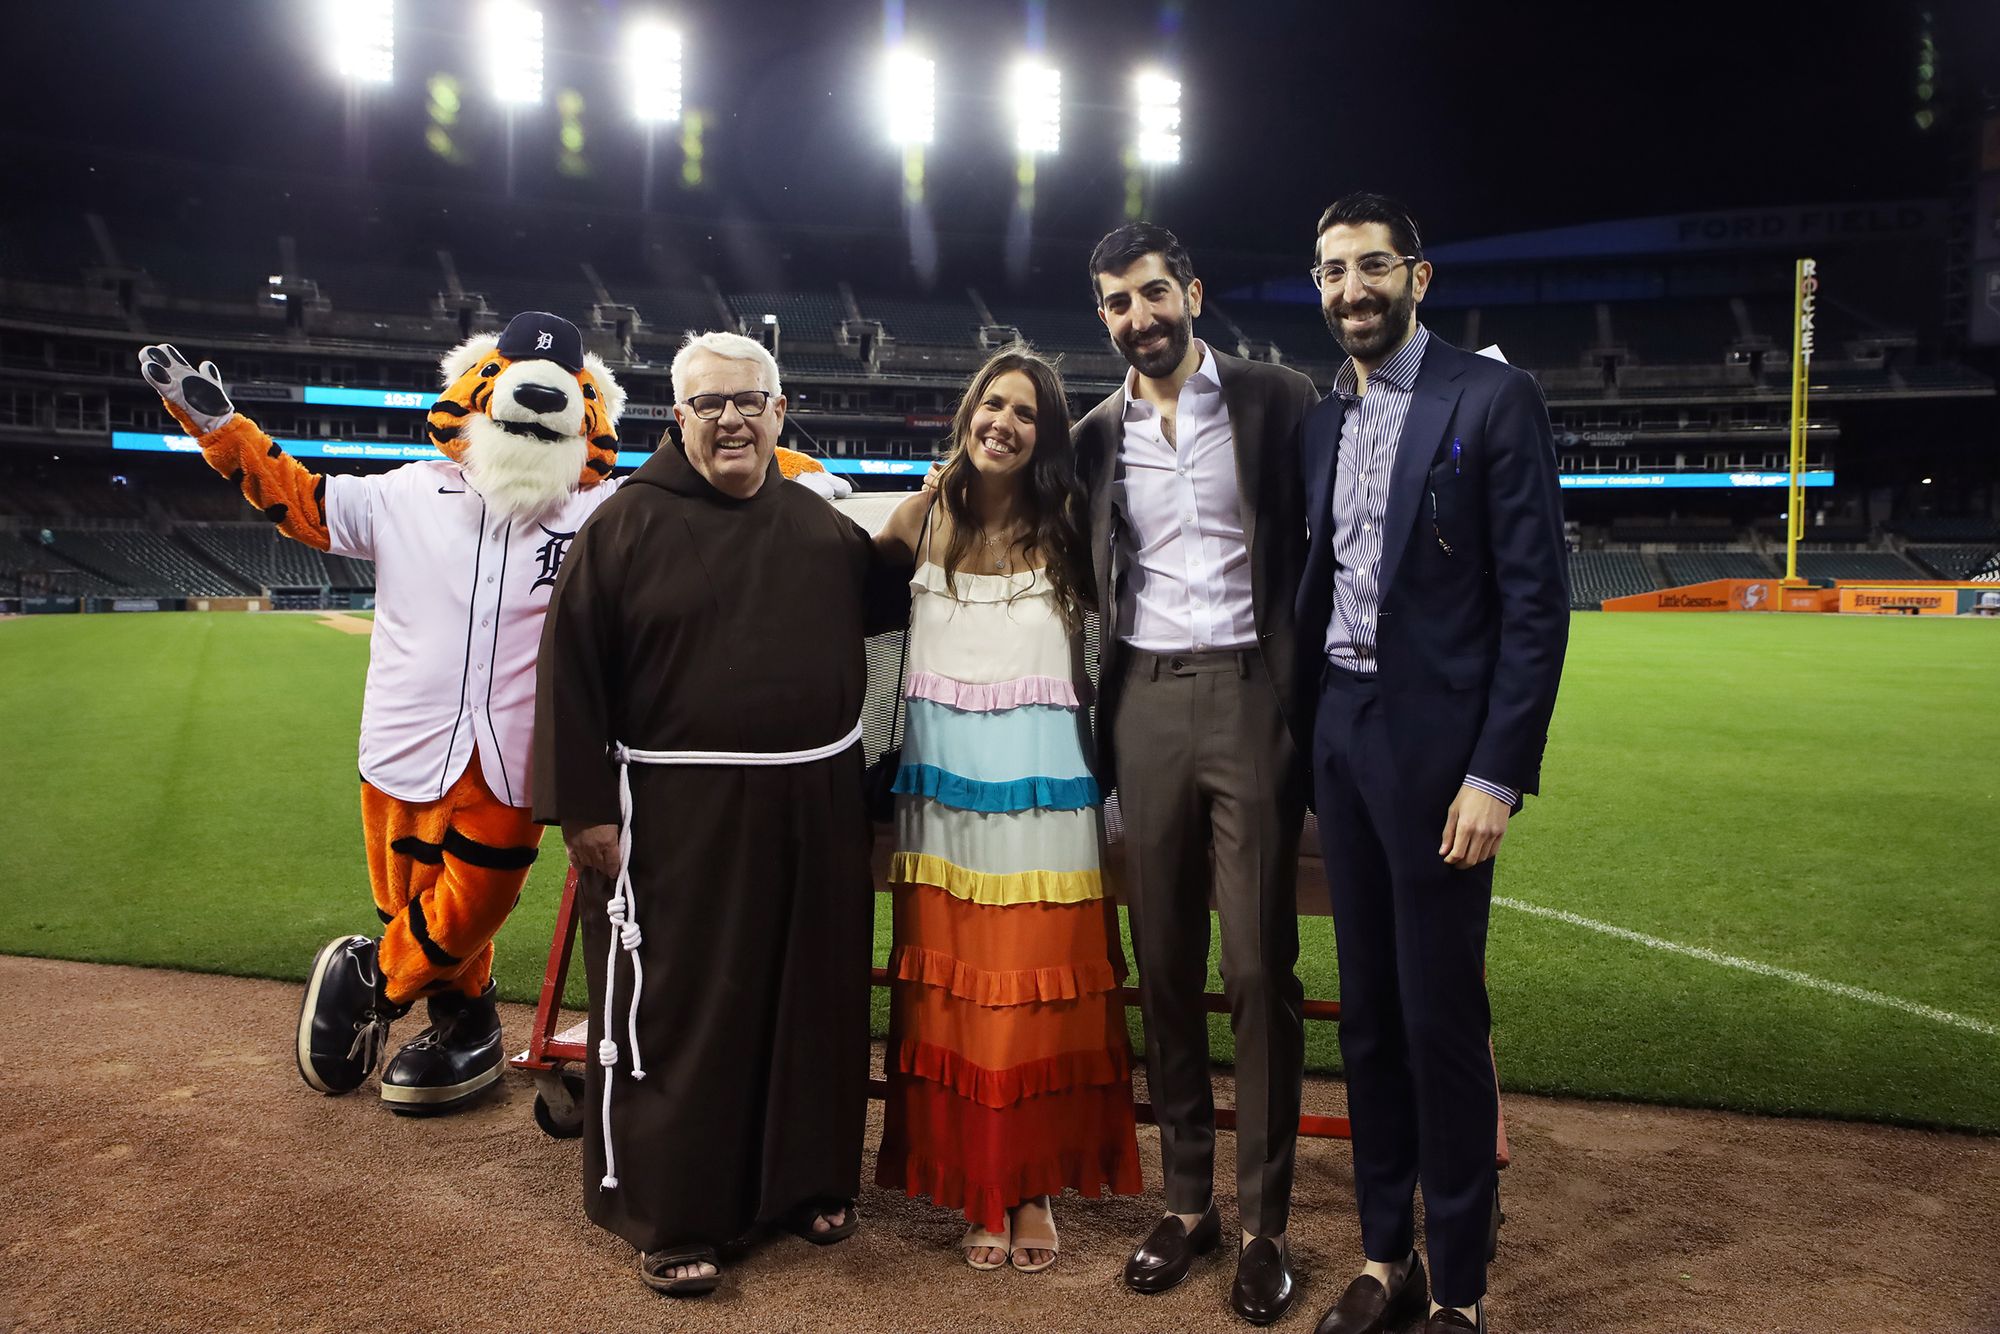 Detroit Tigers mascot Paws, Br. Gary Wegner and the Ahee family on the field at Comerica Park